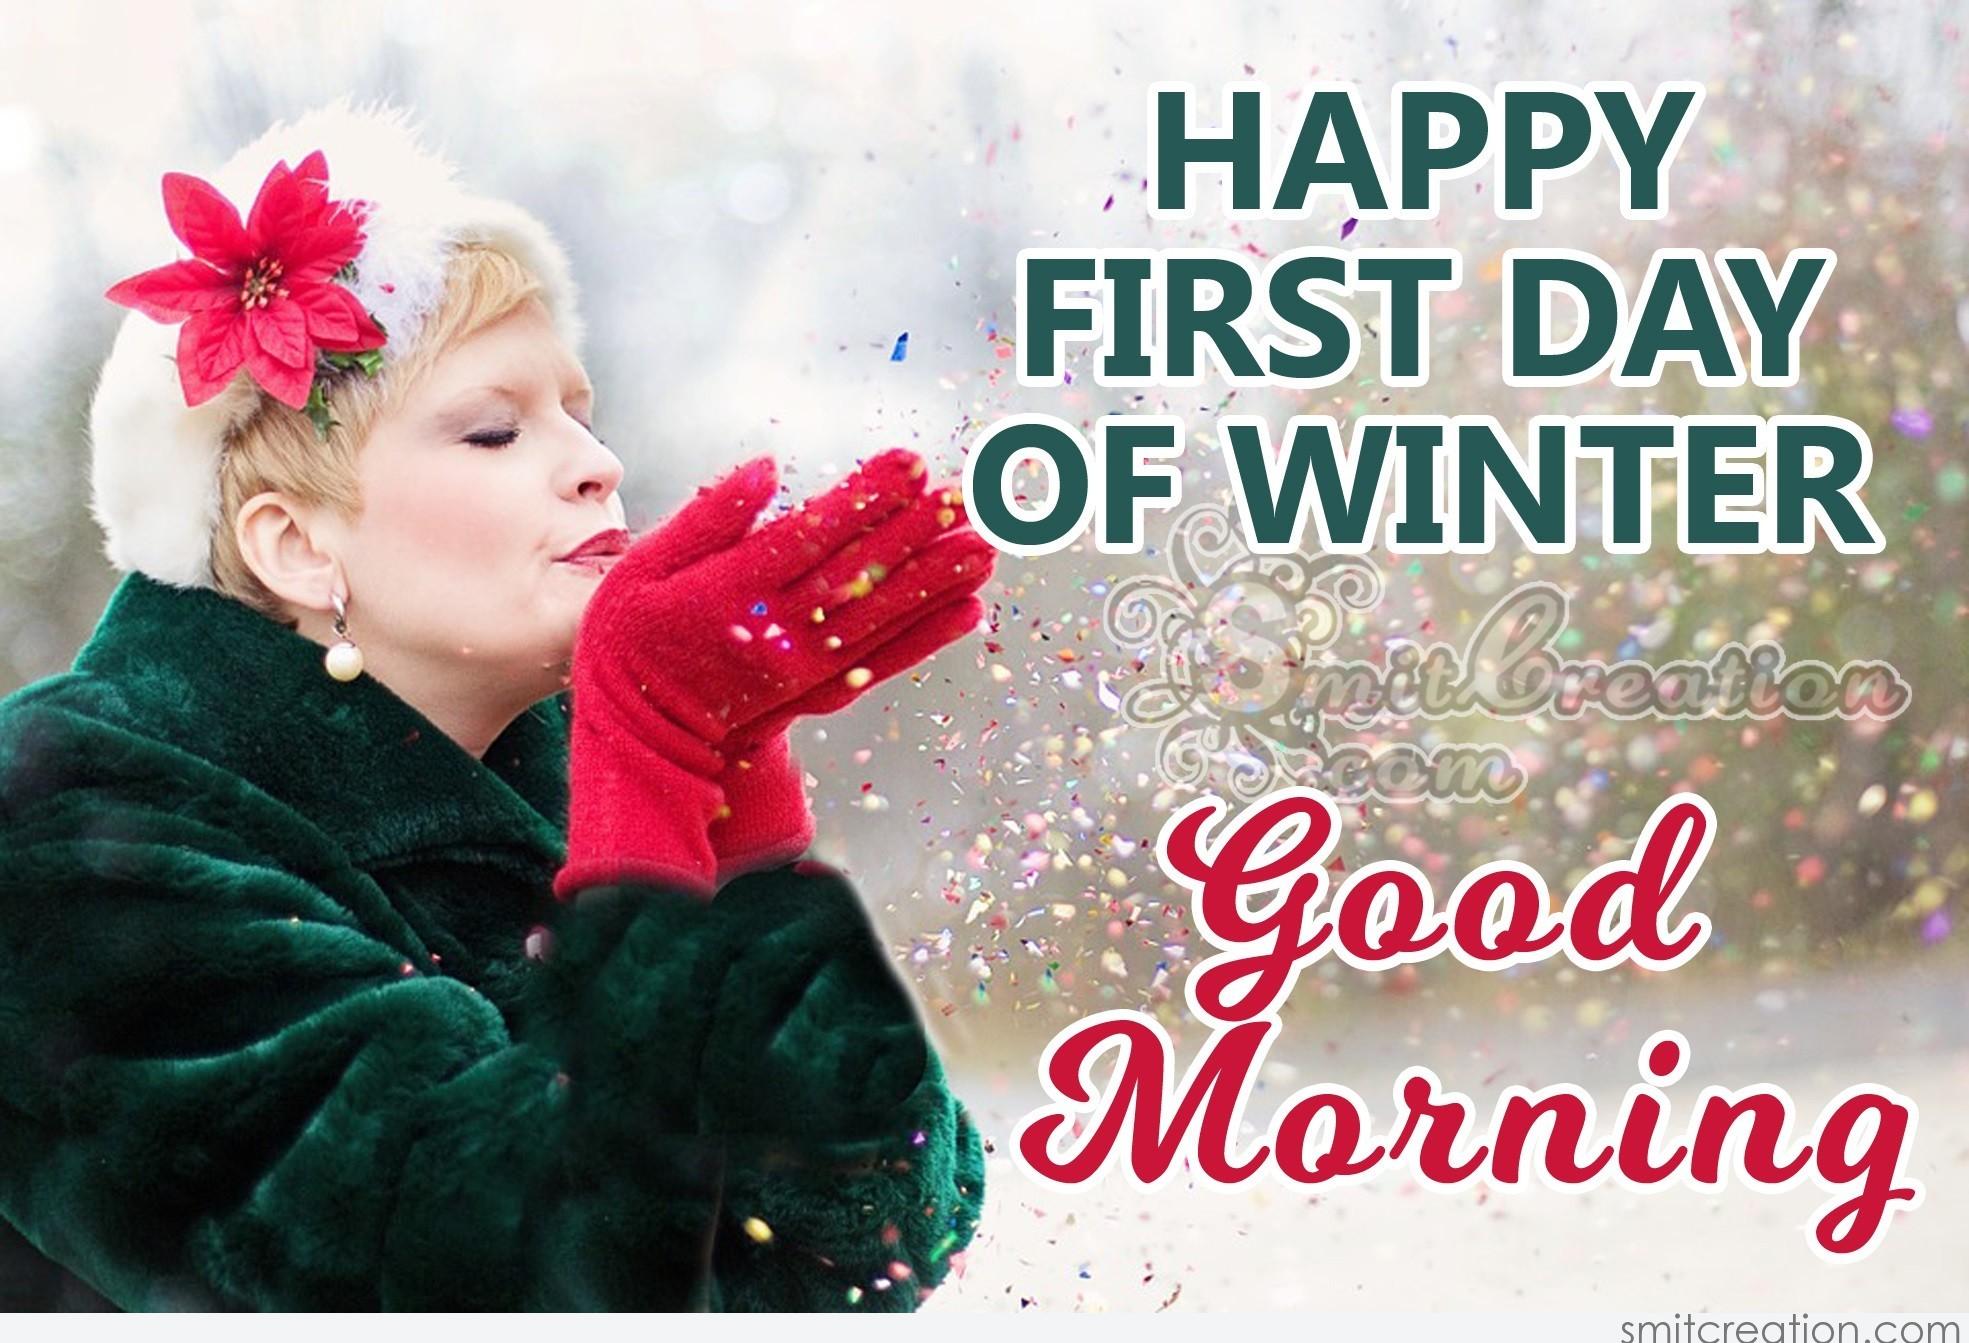 GOOD MORNING HAPPY FIRST DAY OF WINTER